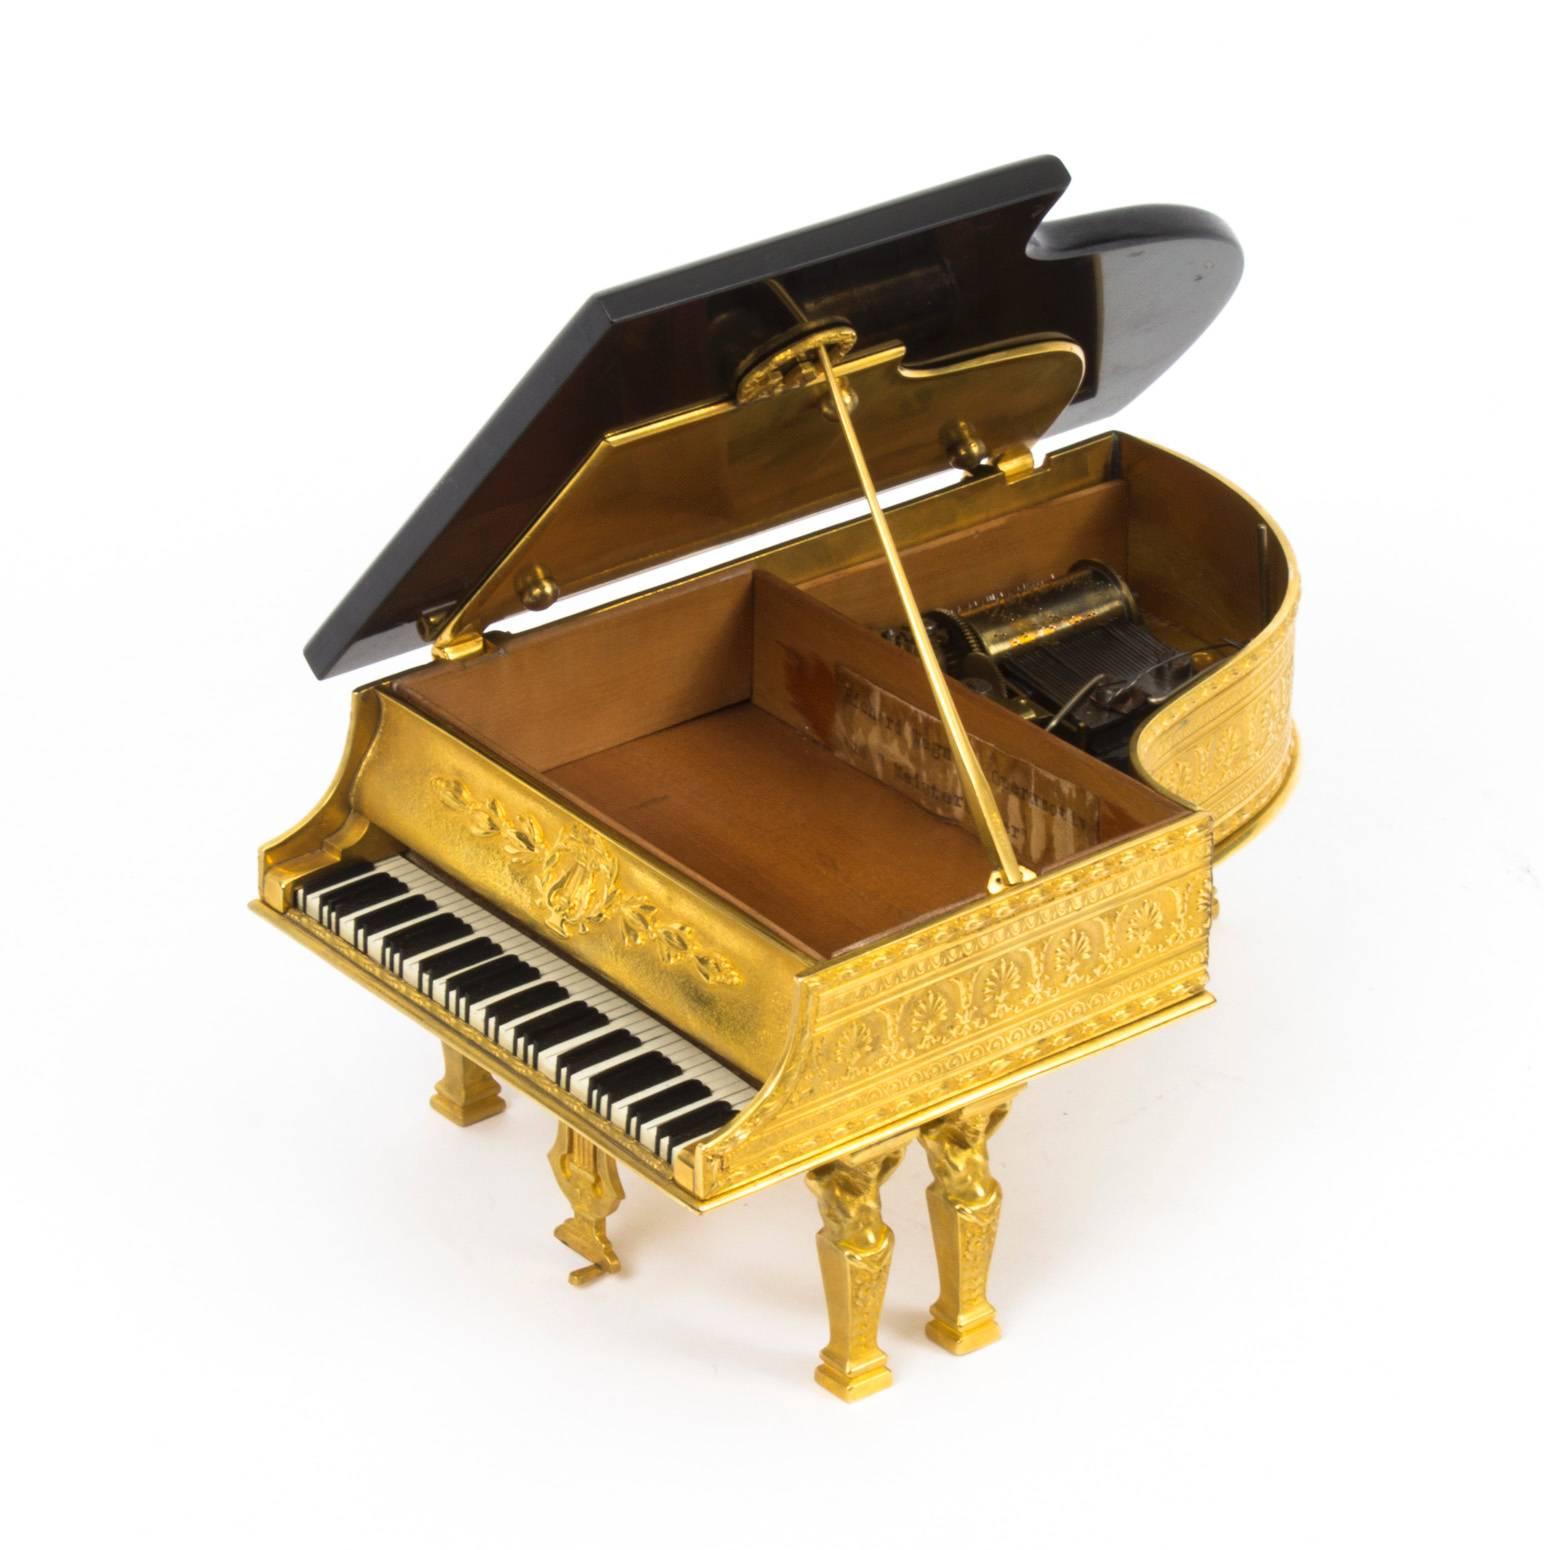 A superb Viennese ormolu piano musical jewellery box, the underside stamped with the makers name, G.Brehmer, Vienna Austria, circa 1870 in date.

This delightful casket is beautifully decorated with striking embossed decoration and it has a